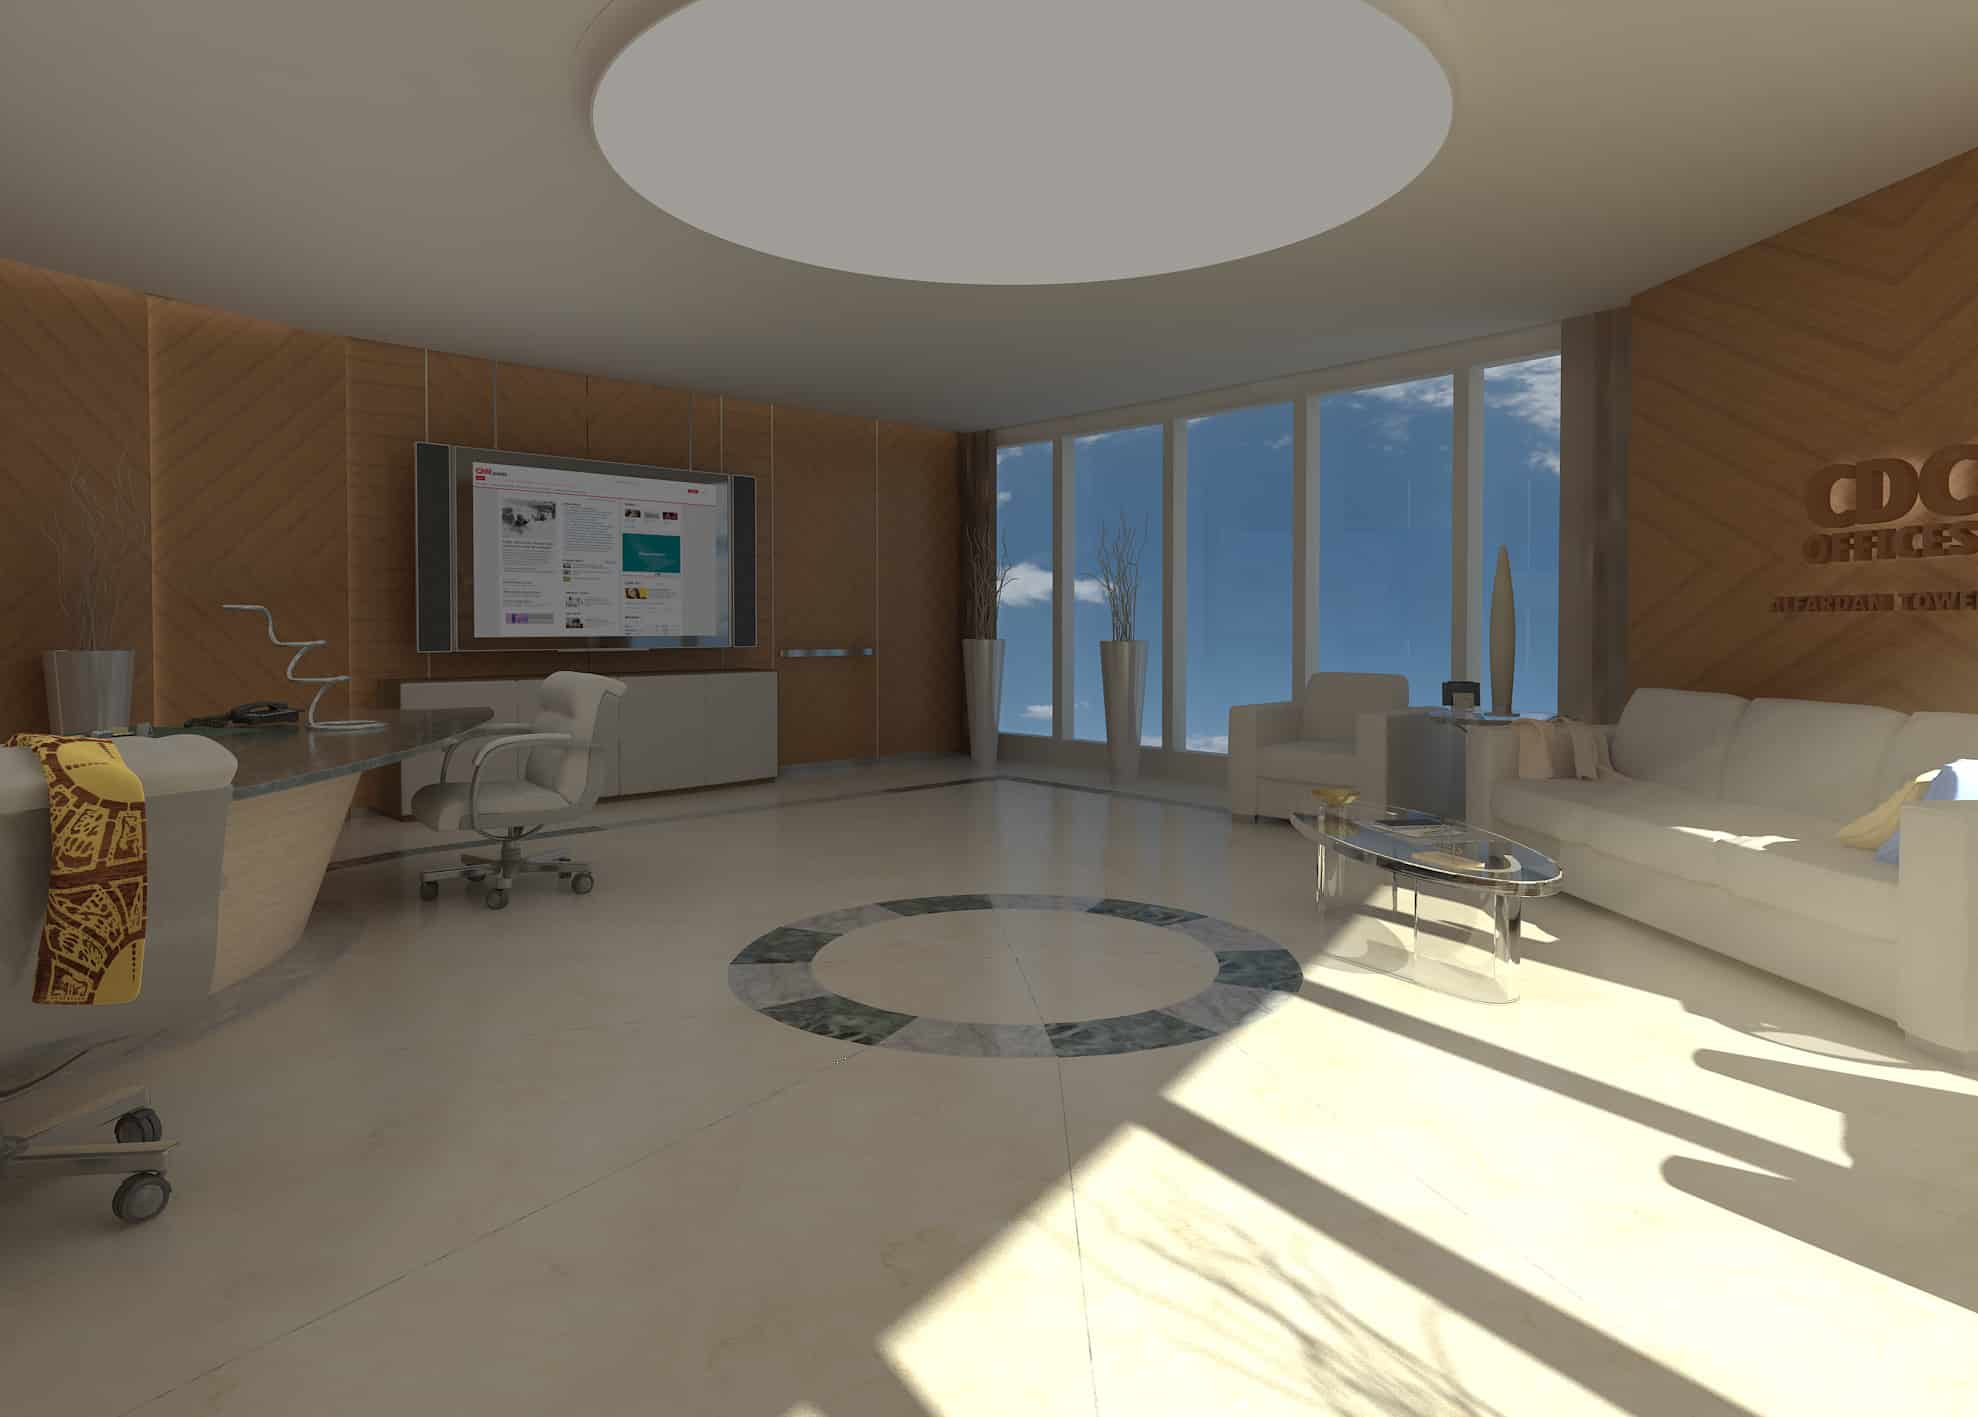 South_Developers_Office_Stampa_Diuma_3